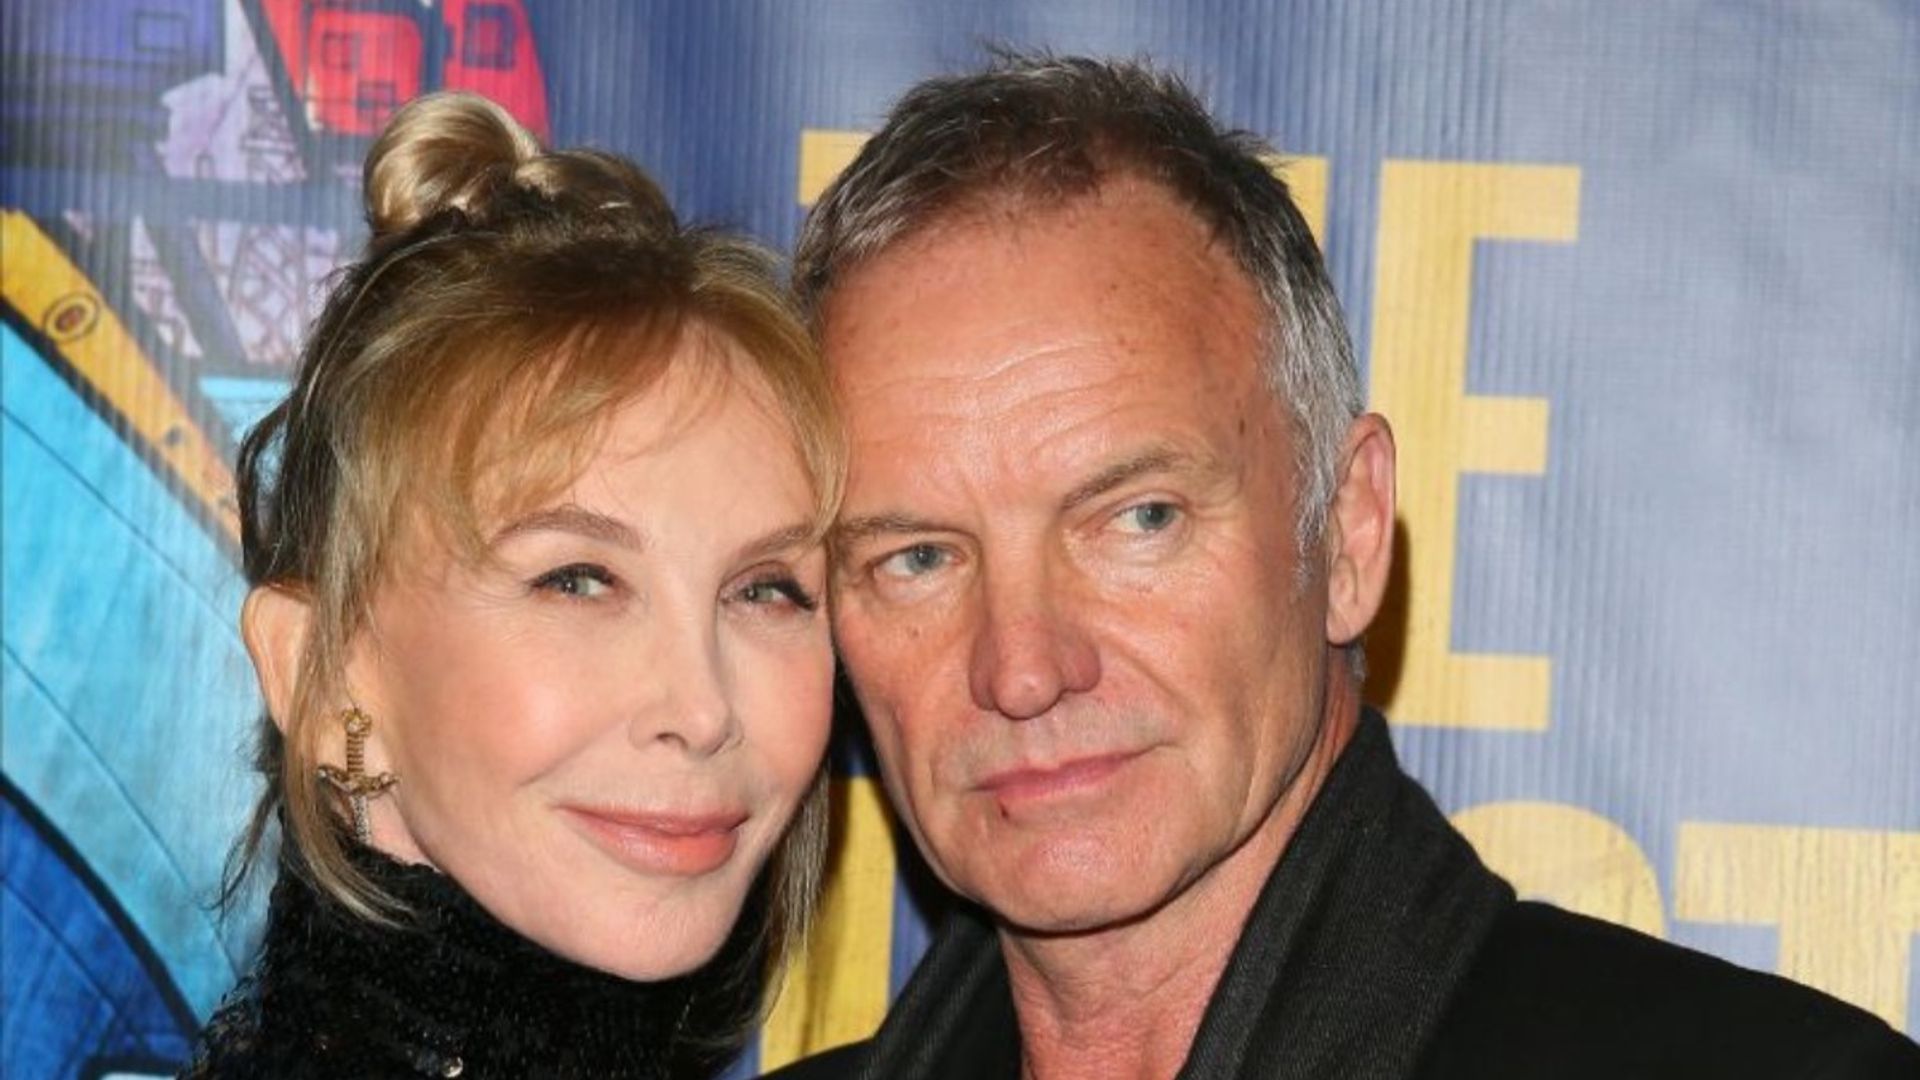 Sting and Trudie Styler shared exciting news with their fans.